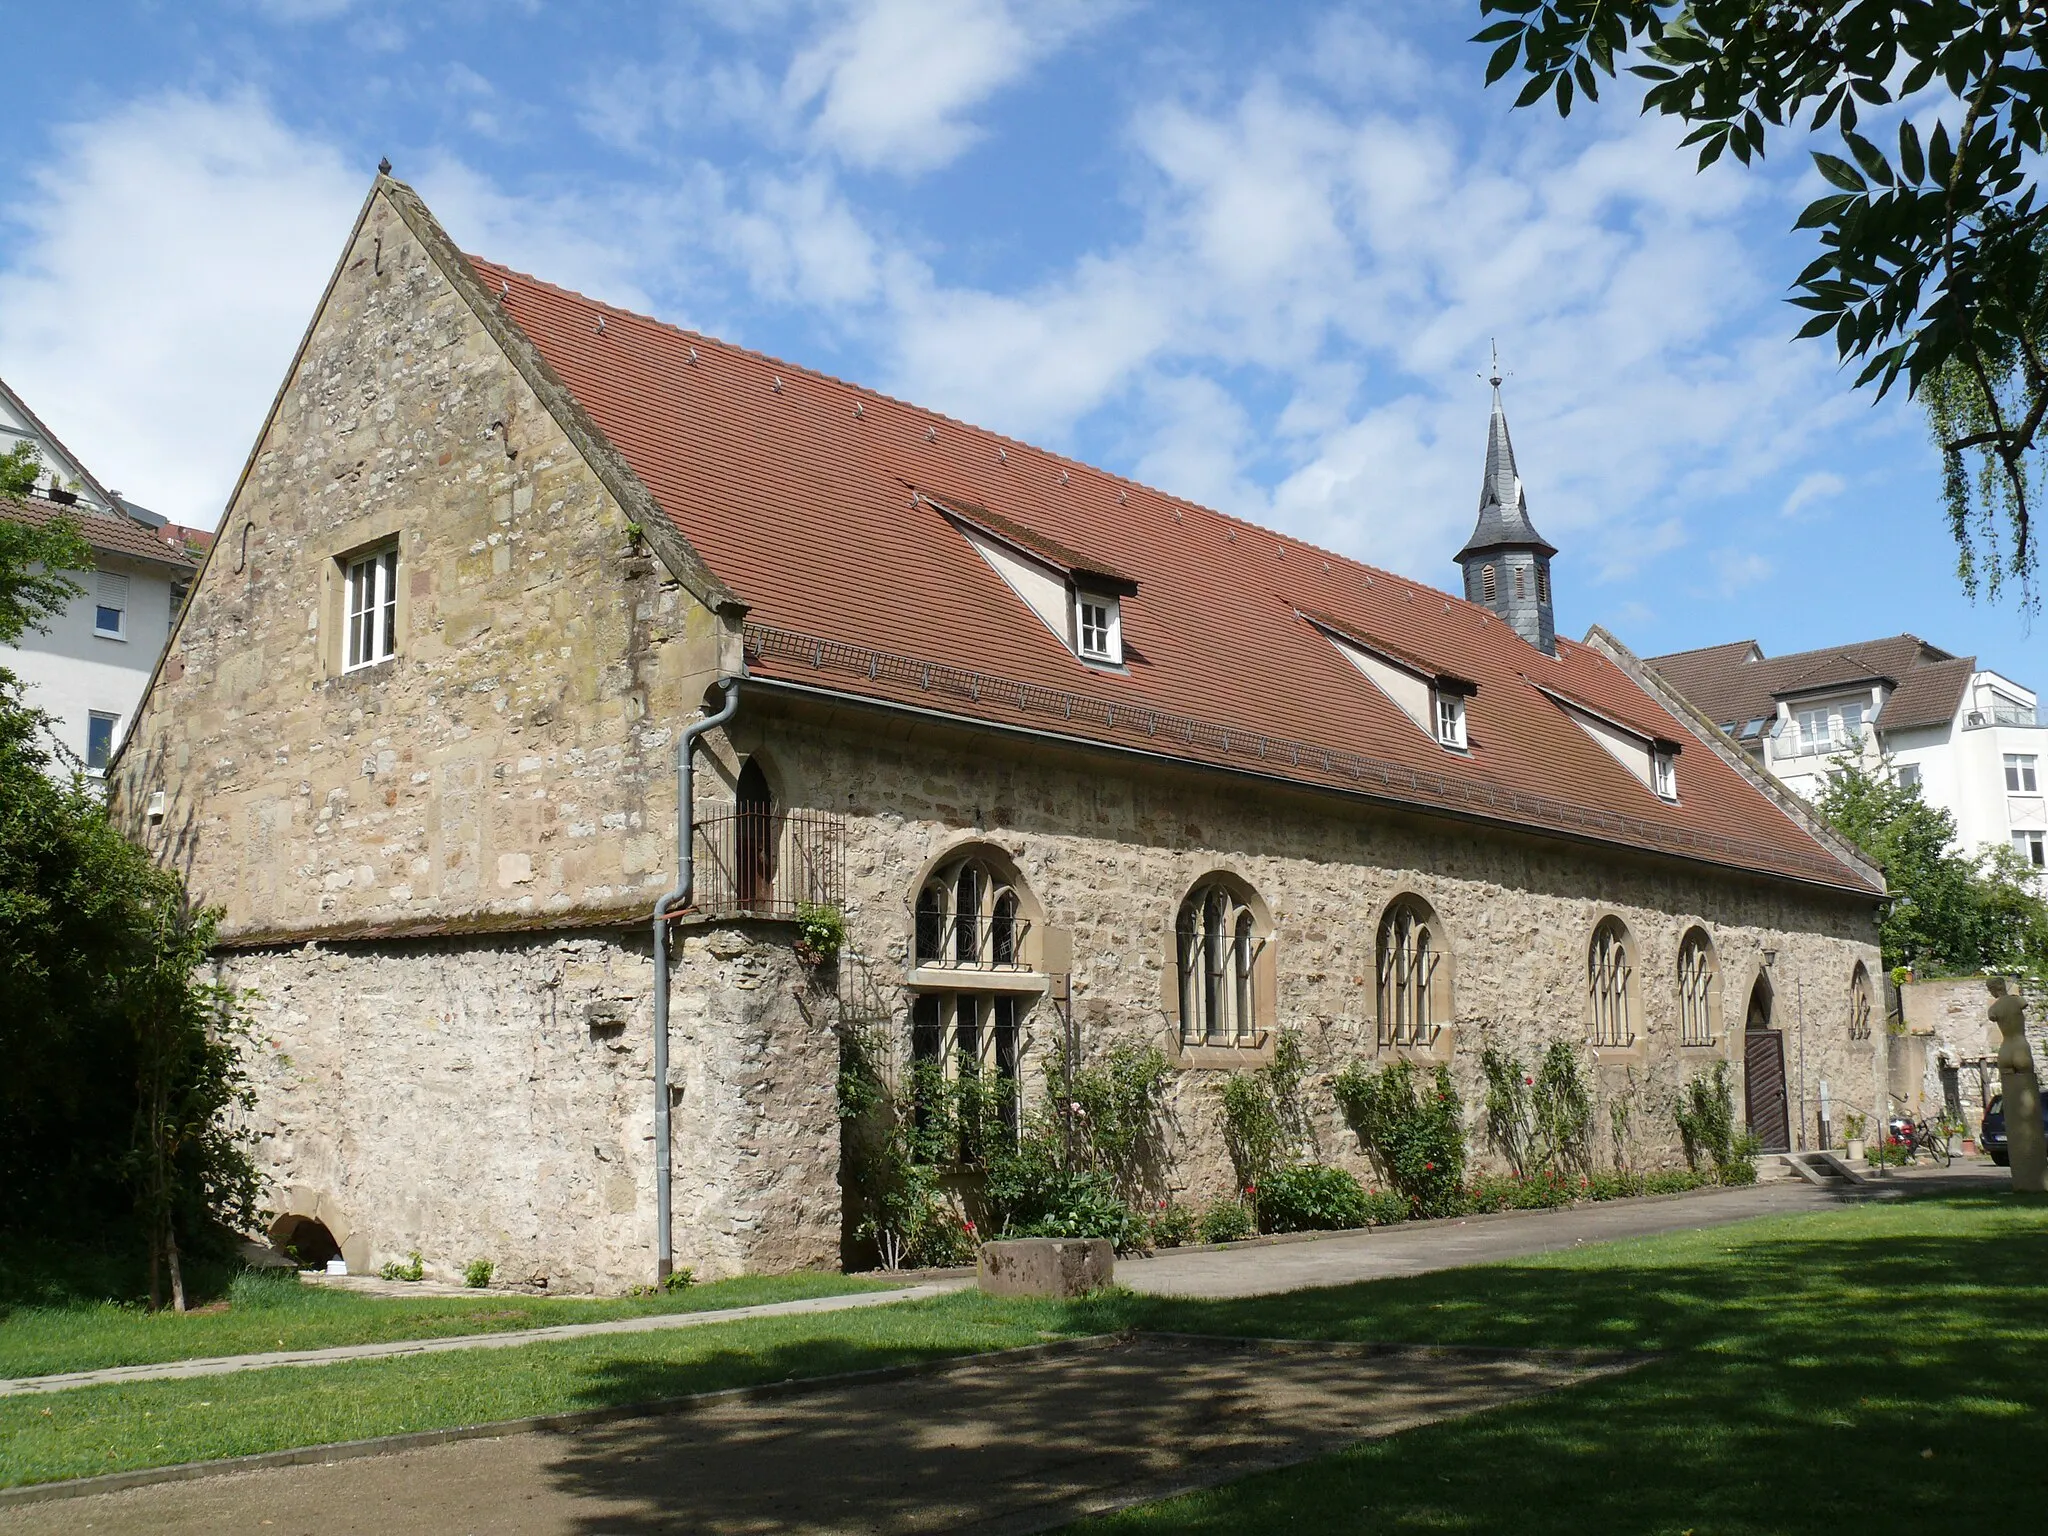 Photo showing: Lauffen am Neckar (Baden-Württemberg, Germany): The Klosterhof area, the church of the former monastery, seen from southwest.